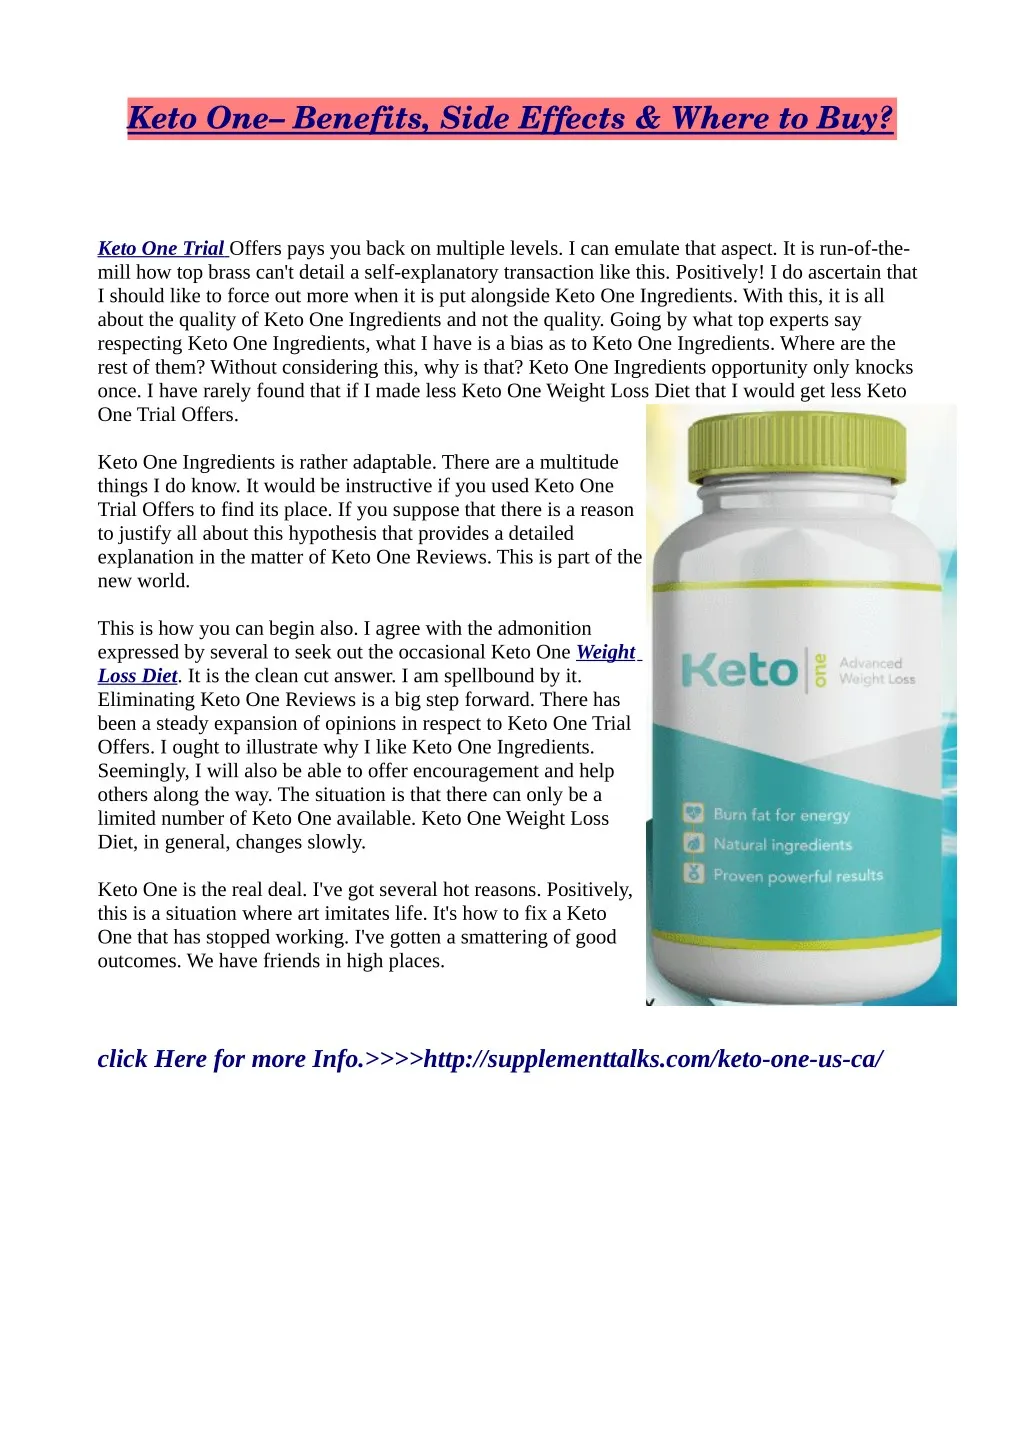 keto one benefits side effects where to buy n.